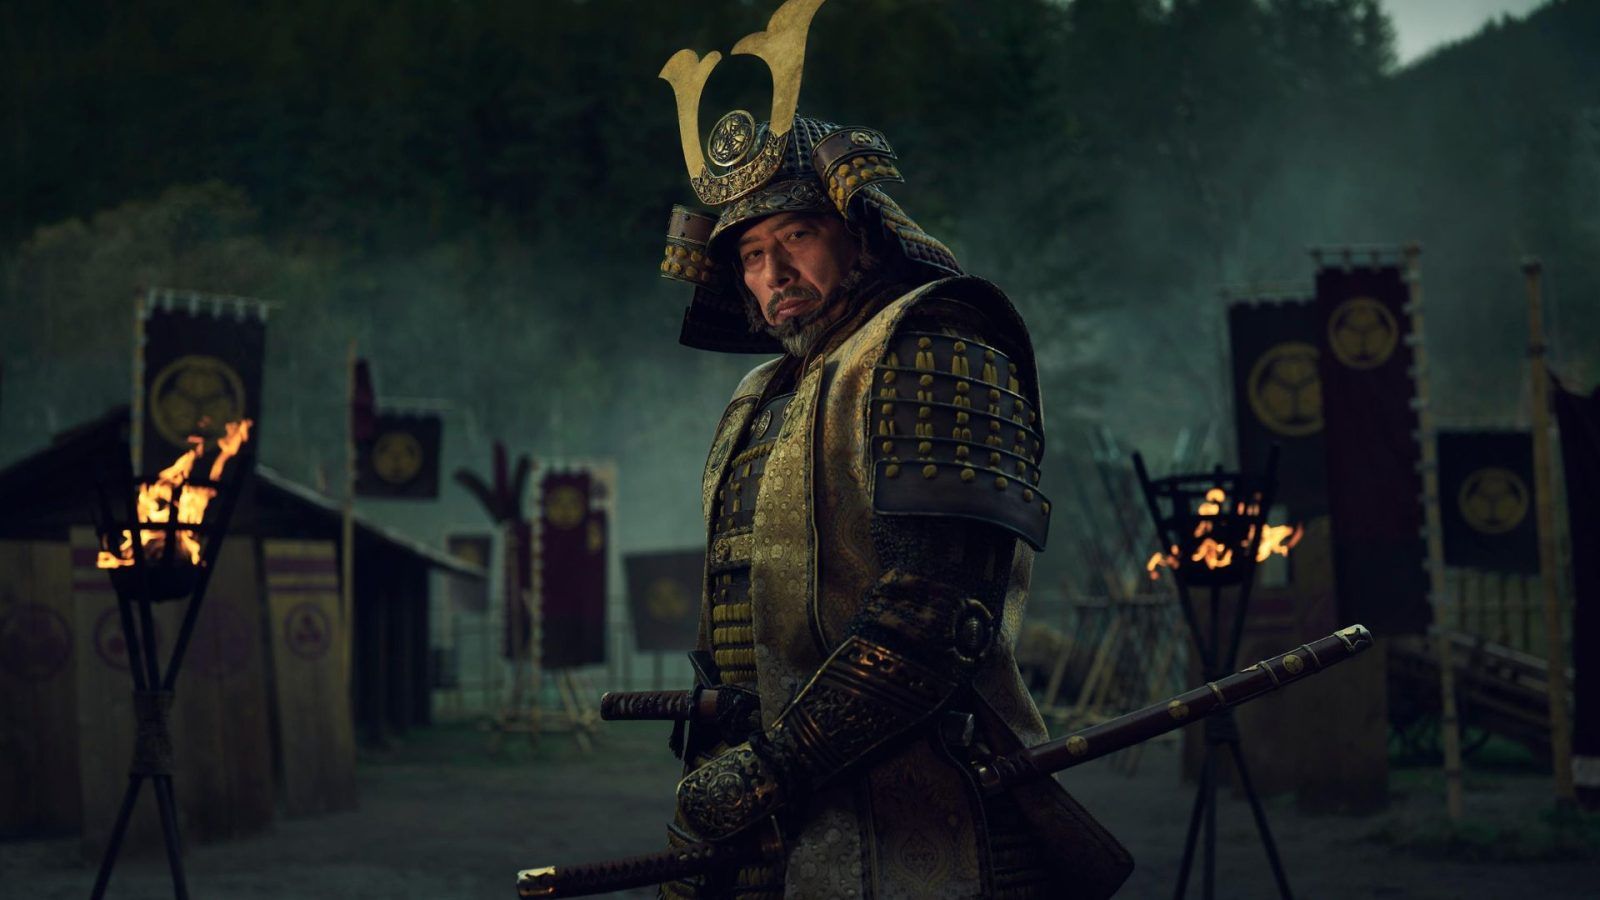 <i>Shōgun</i> renewed for seasons 2 and 3: Here’s what we know so far